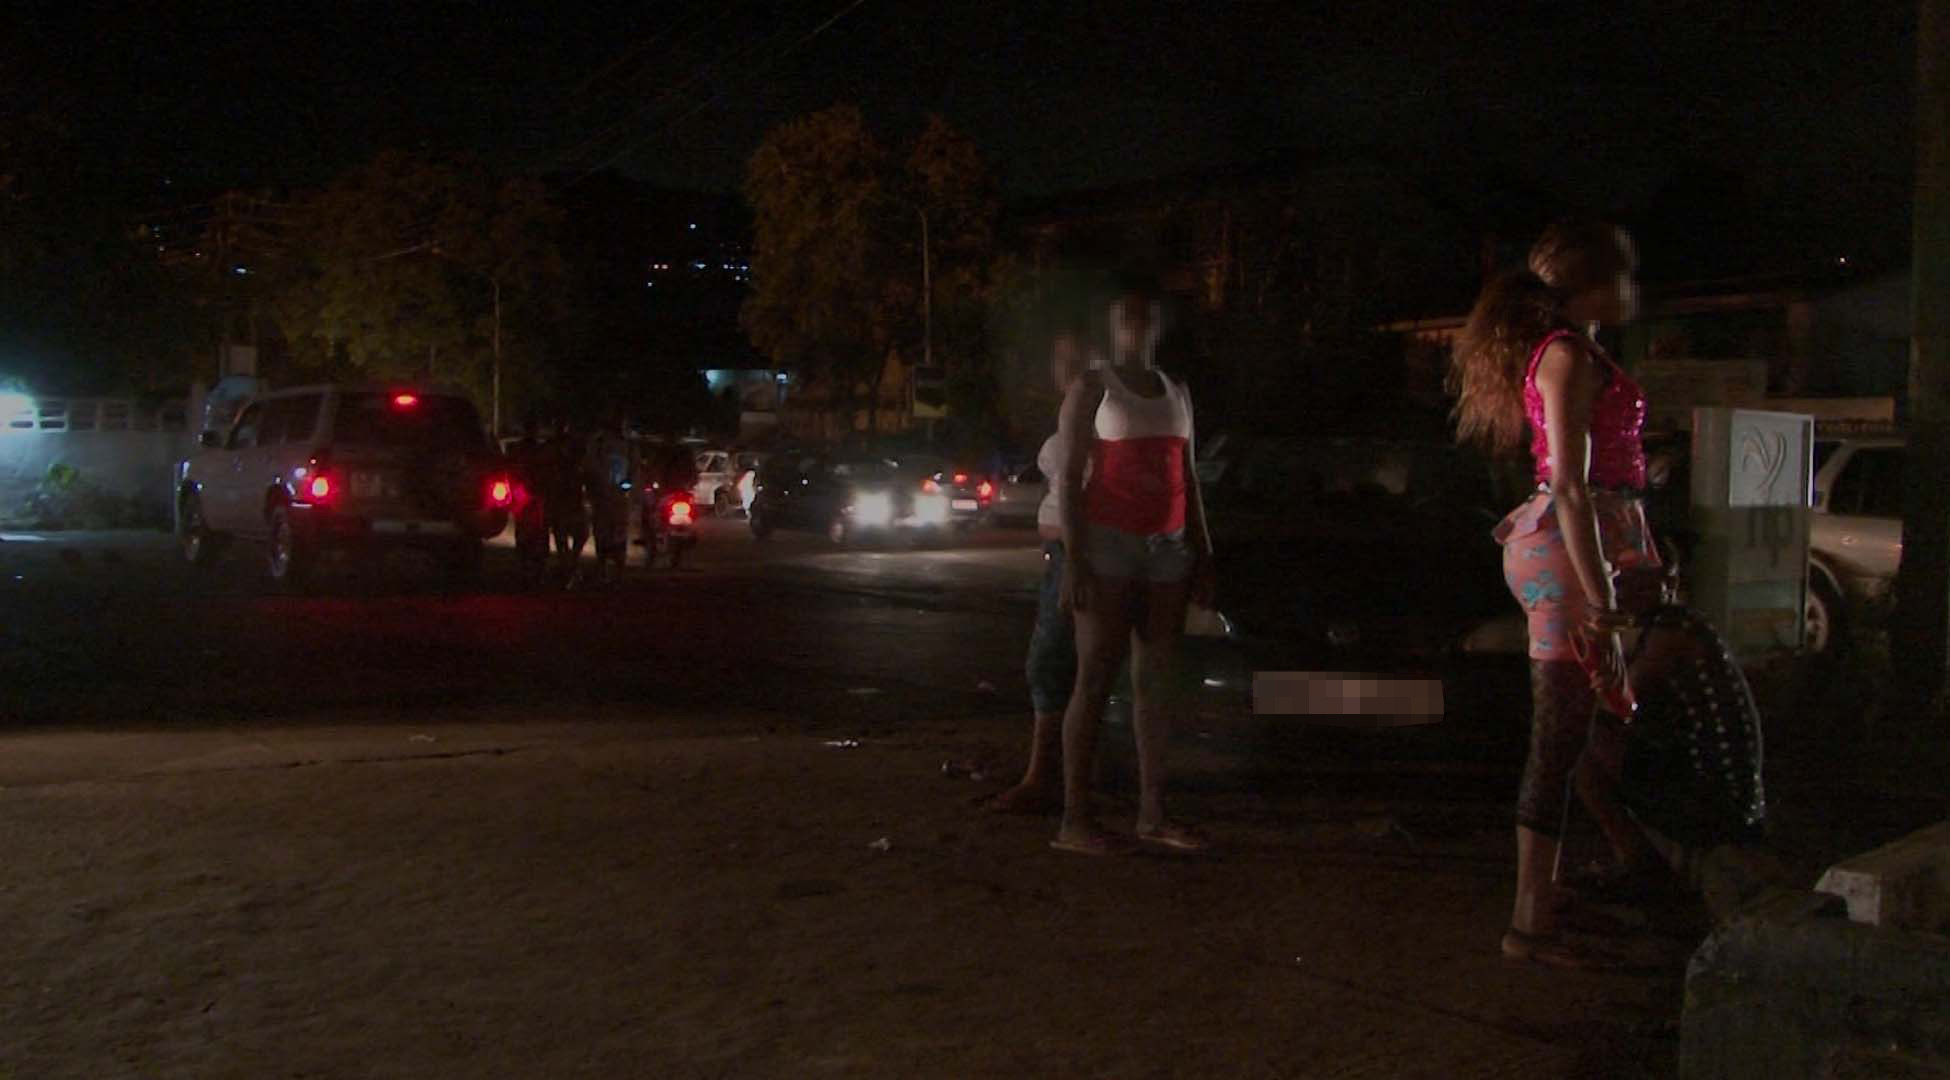 Three women stand to the side of a street at night.